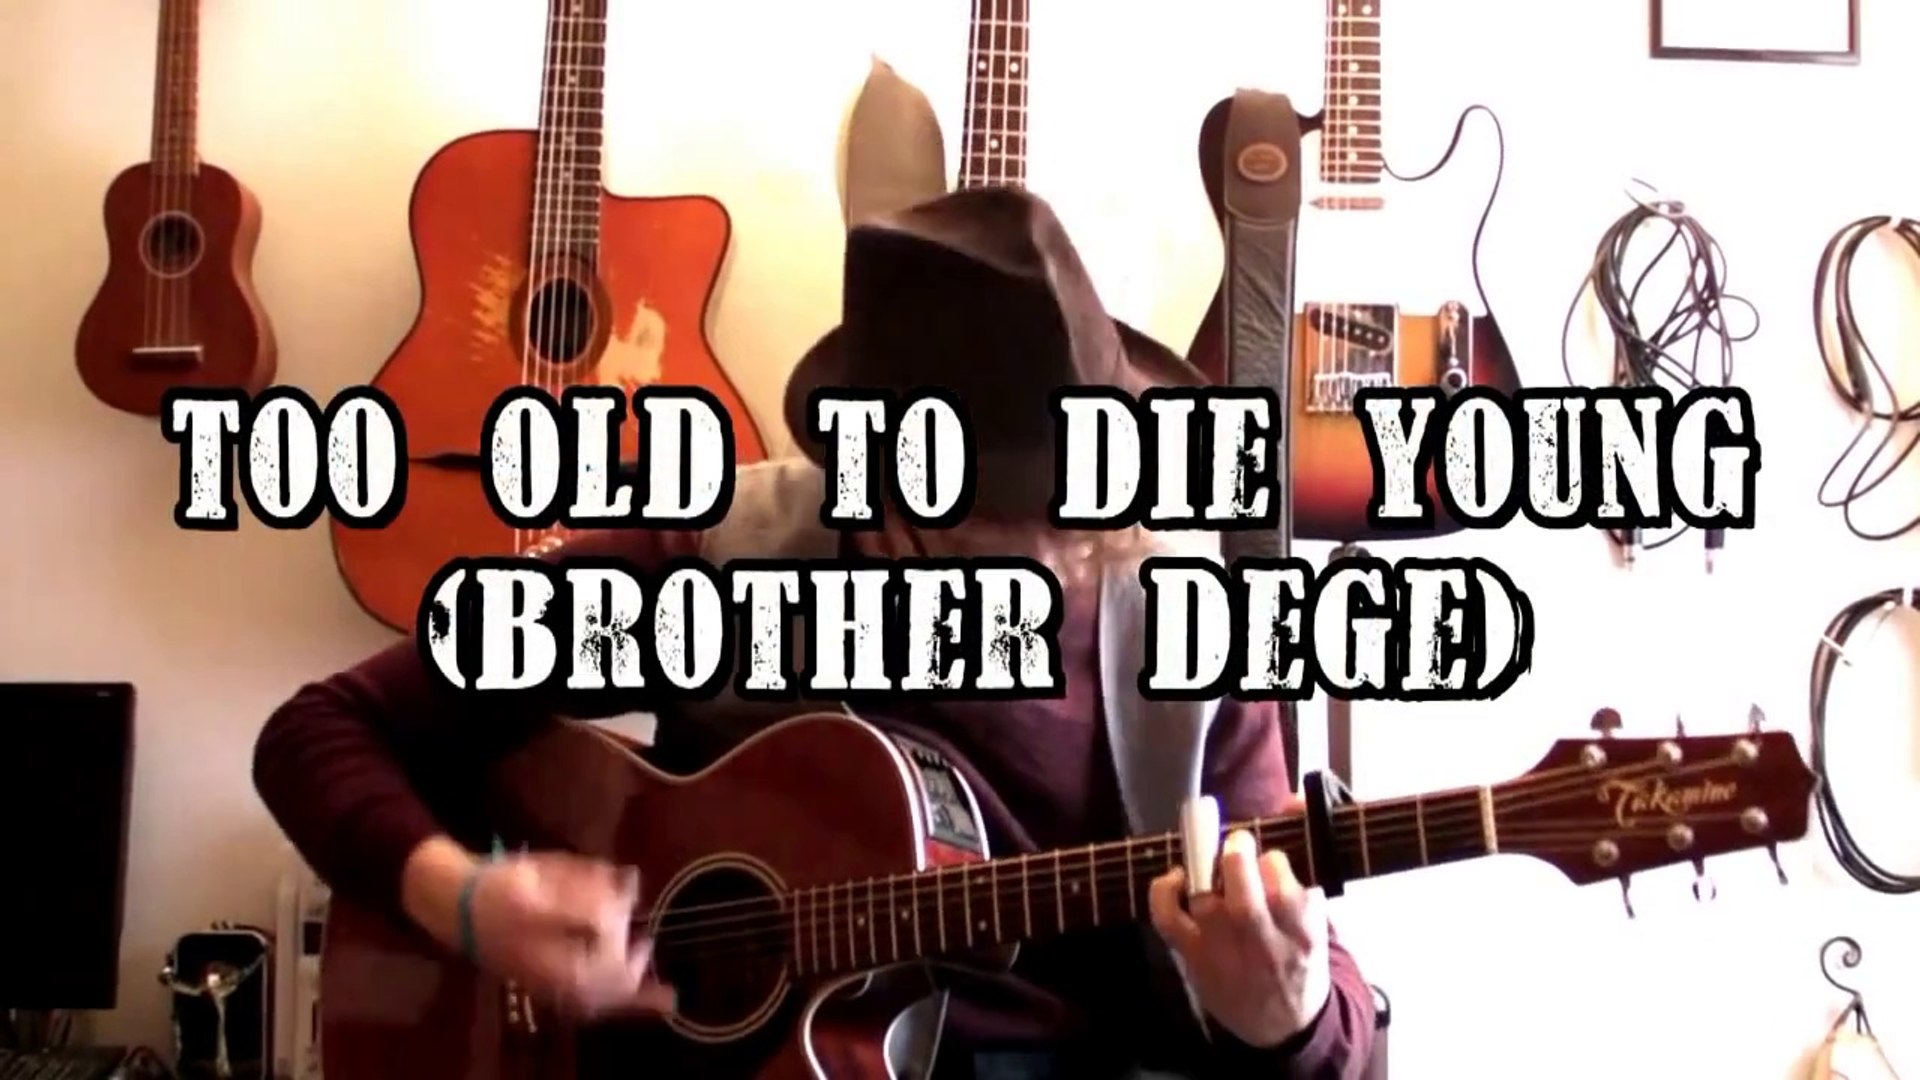 Too old to die young (Brother Dege - BO Tarantino) - Tuto guitare + TABS -  Vidéo Dailymotion